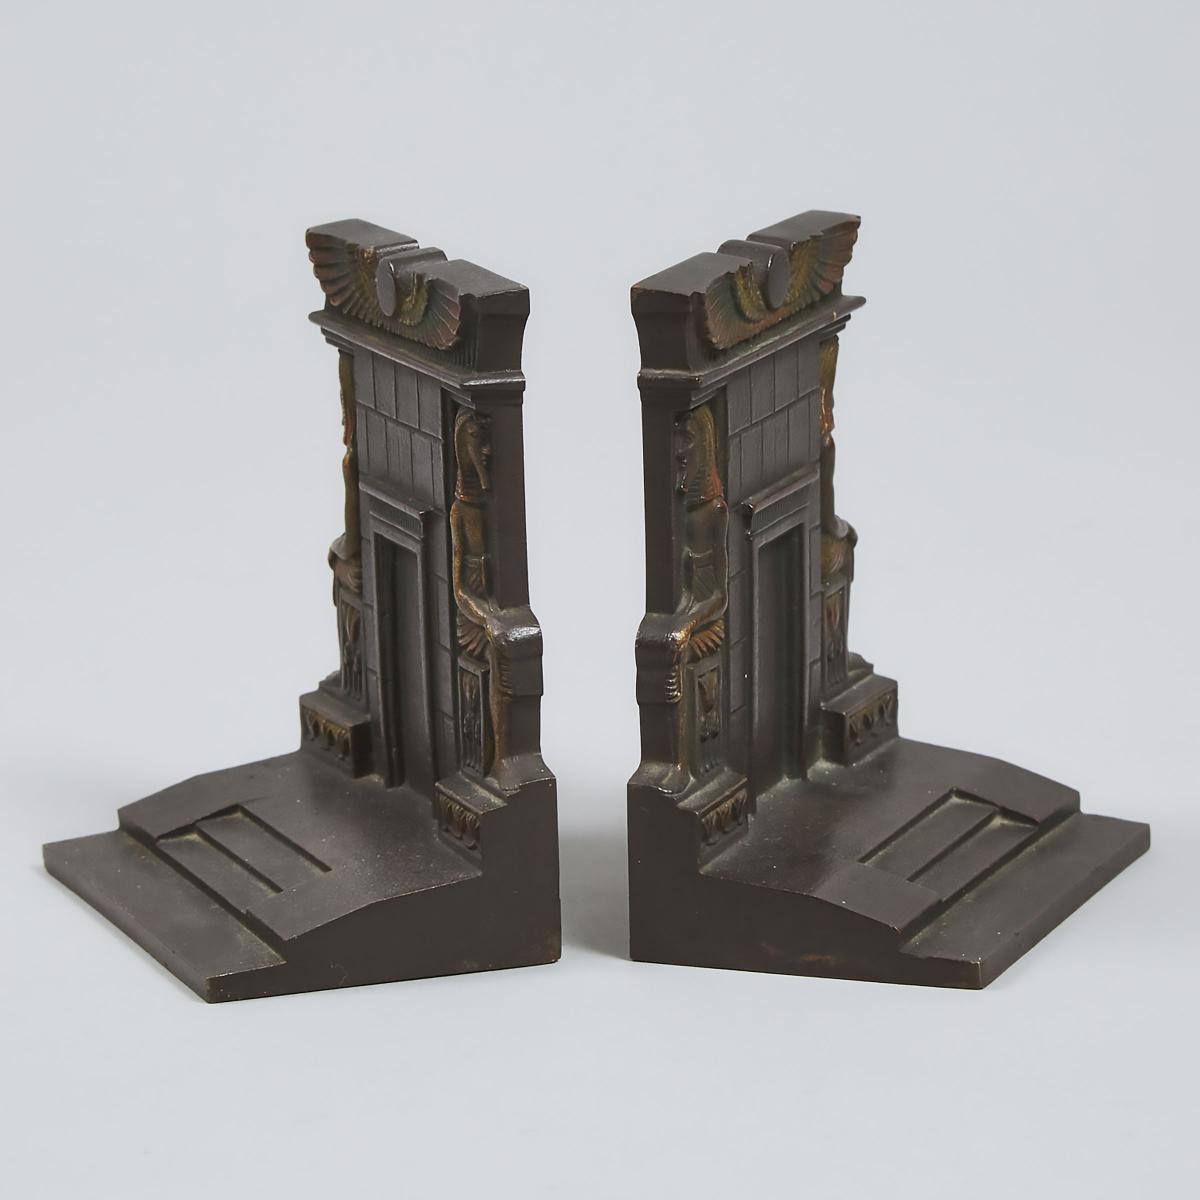 Pair of Bradely & Hubbard Egyptian Revival Cast Iron Bookends, c.1922, height 5.25 in — 13.3 cm - Image 2 of 3